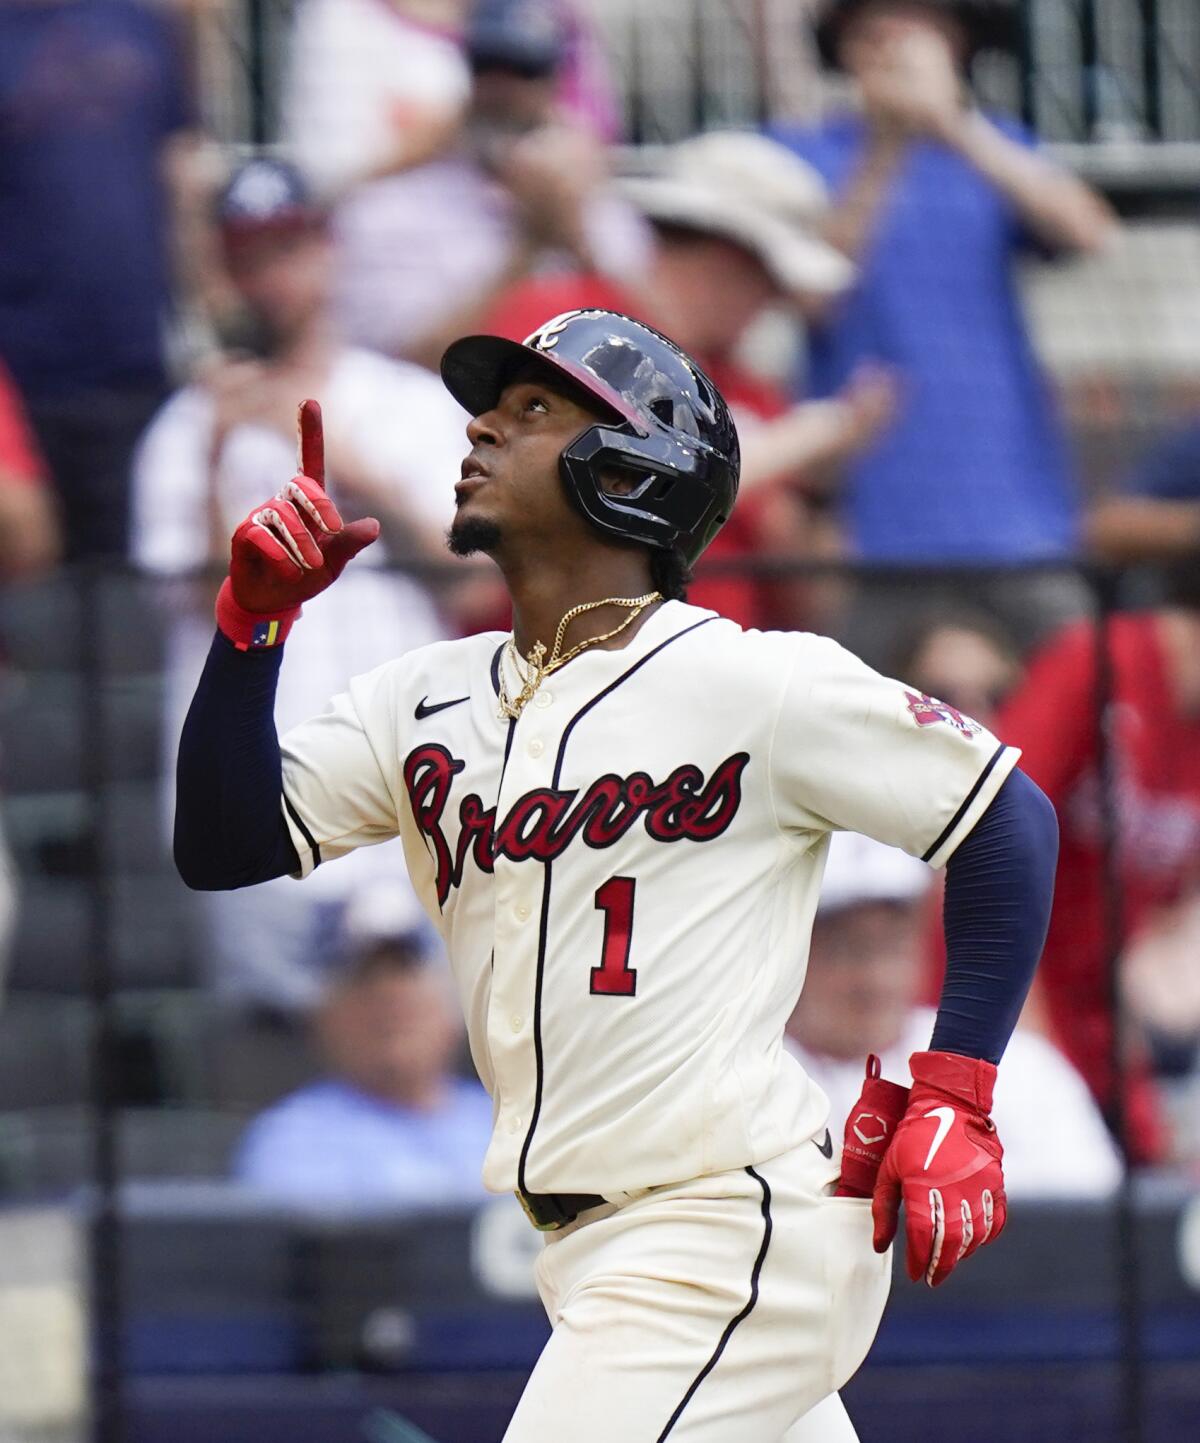 Atlanta Braves' Ozzie Albies (1) celebrates after hitting a home run in the third inning of a baseball game against the Washington Nationals Sunday, Aug. 8, 2021, in Atlanta. (AP Photo/Brynn Anderson)